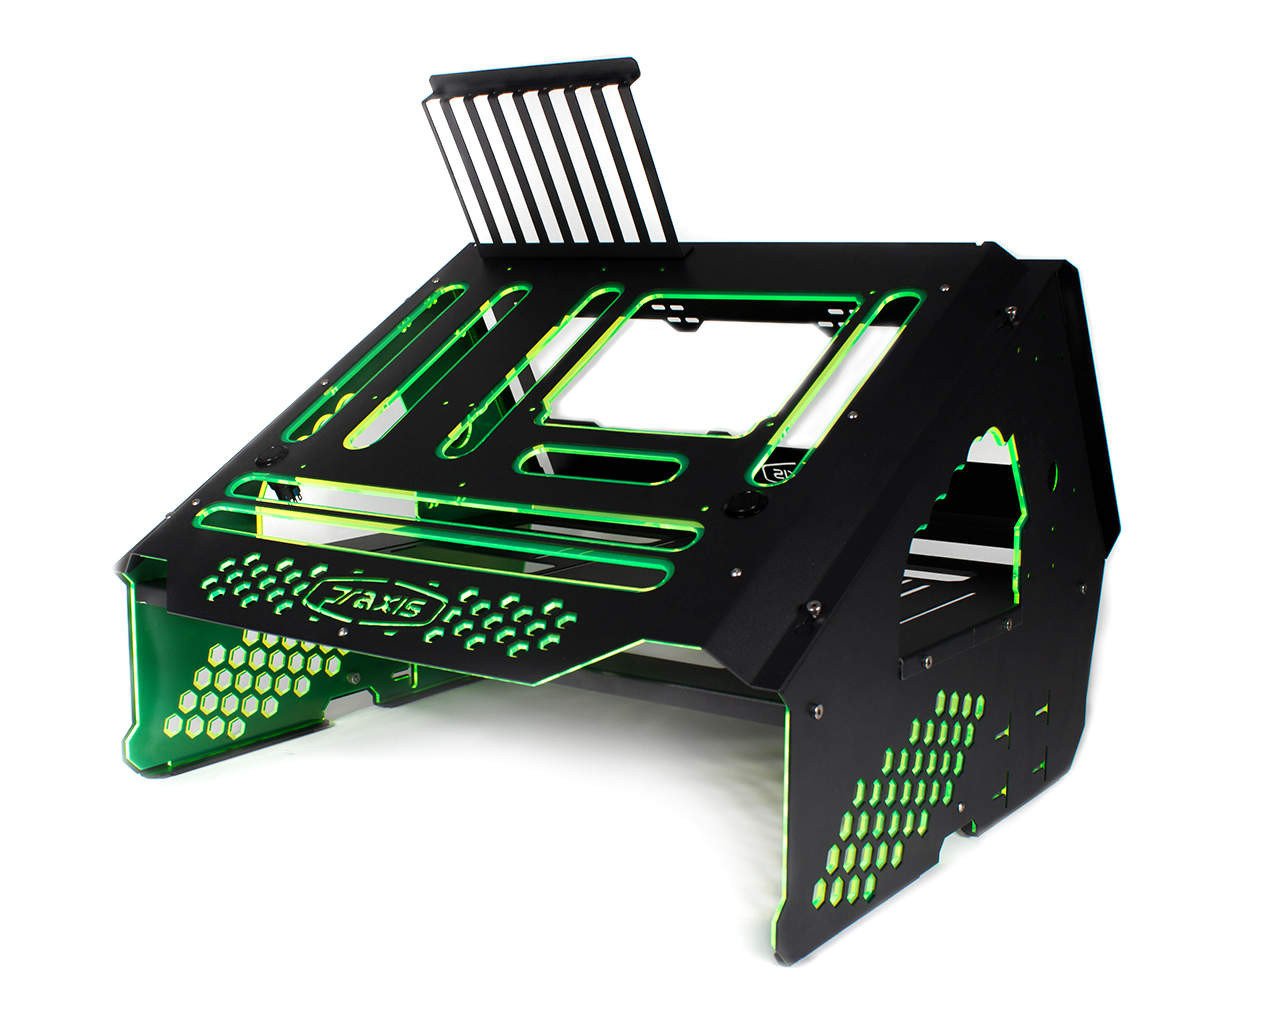 PrimoChill's Praxis Wetbench Powdercoated Steel Modular Open Air Computer Test Bench for Watercooling or Air Cooled Components - PrimoChill - KEEPING IT COOL Black w/UV Green Accents